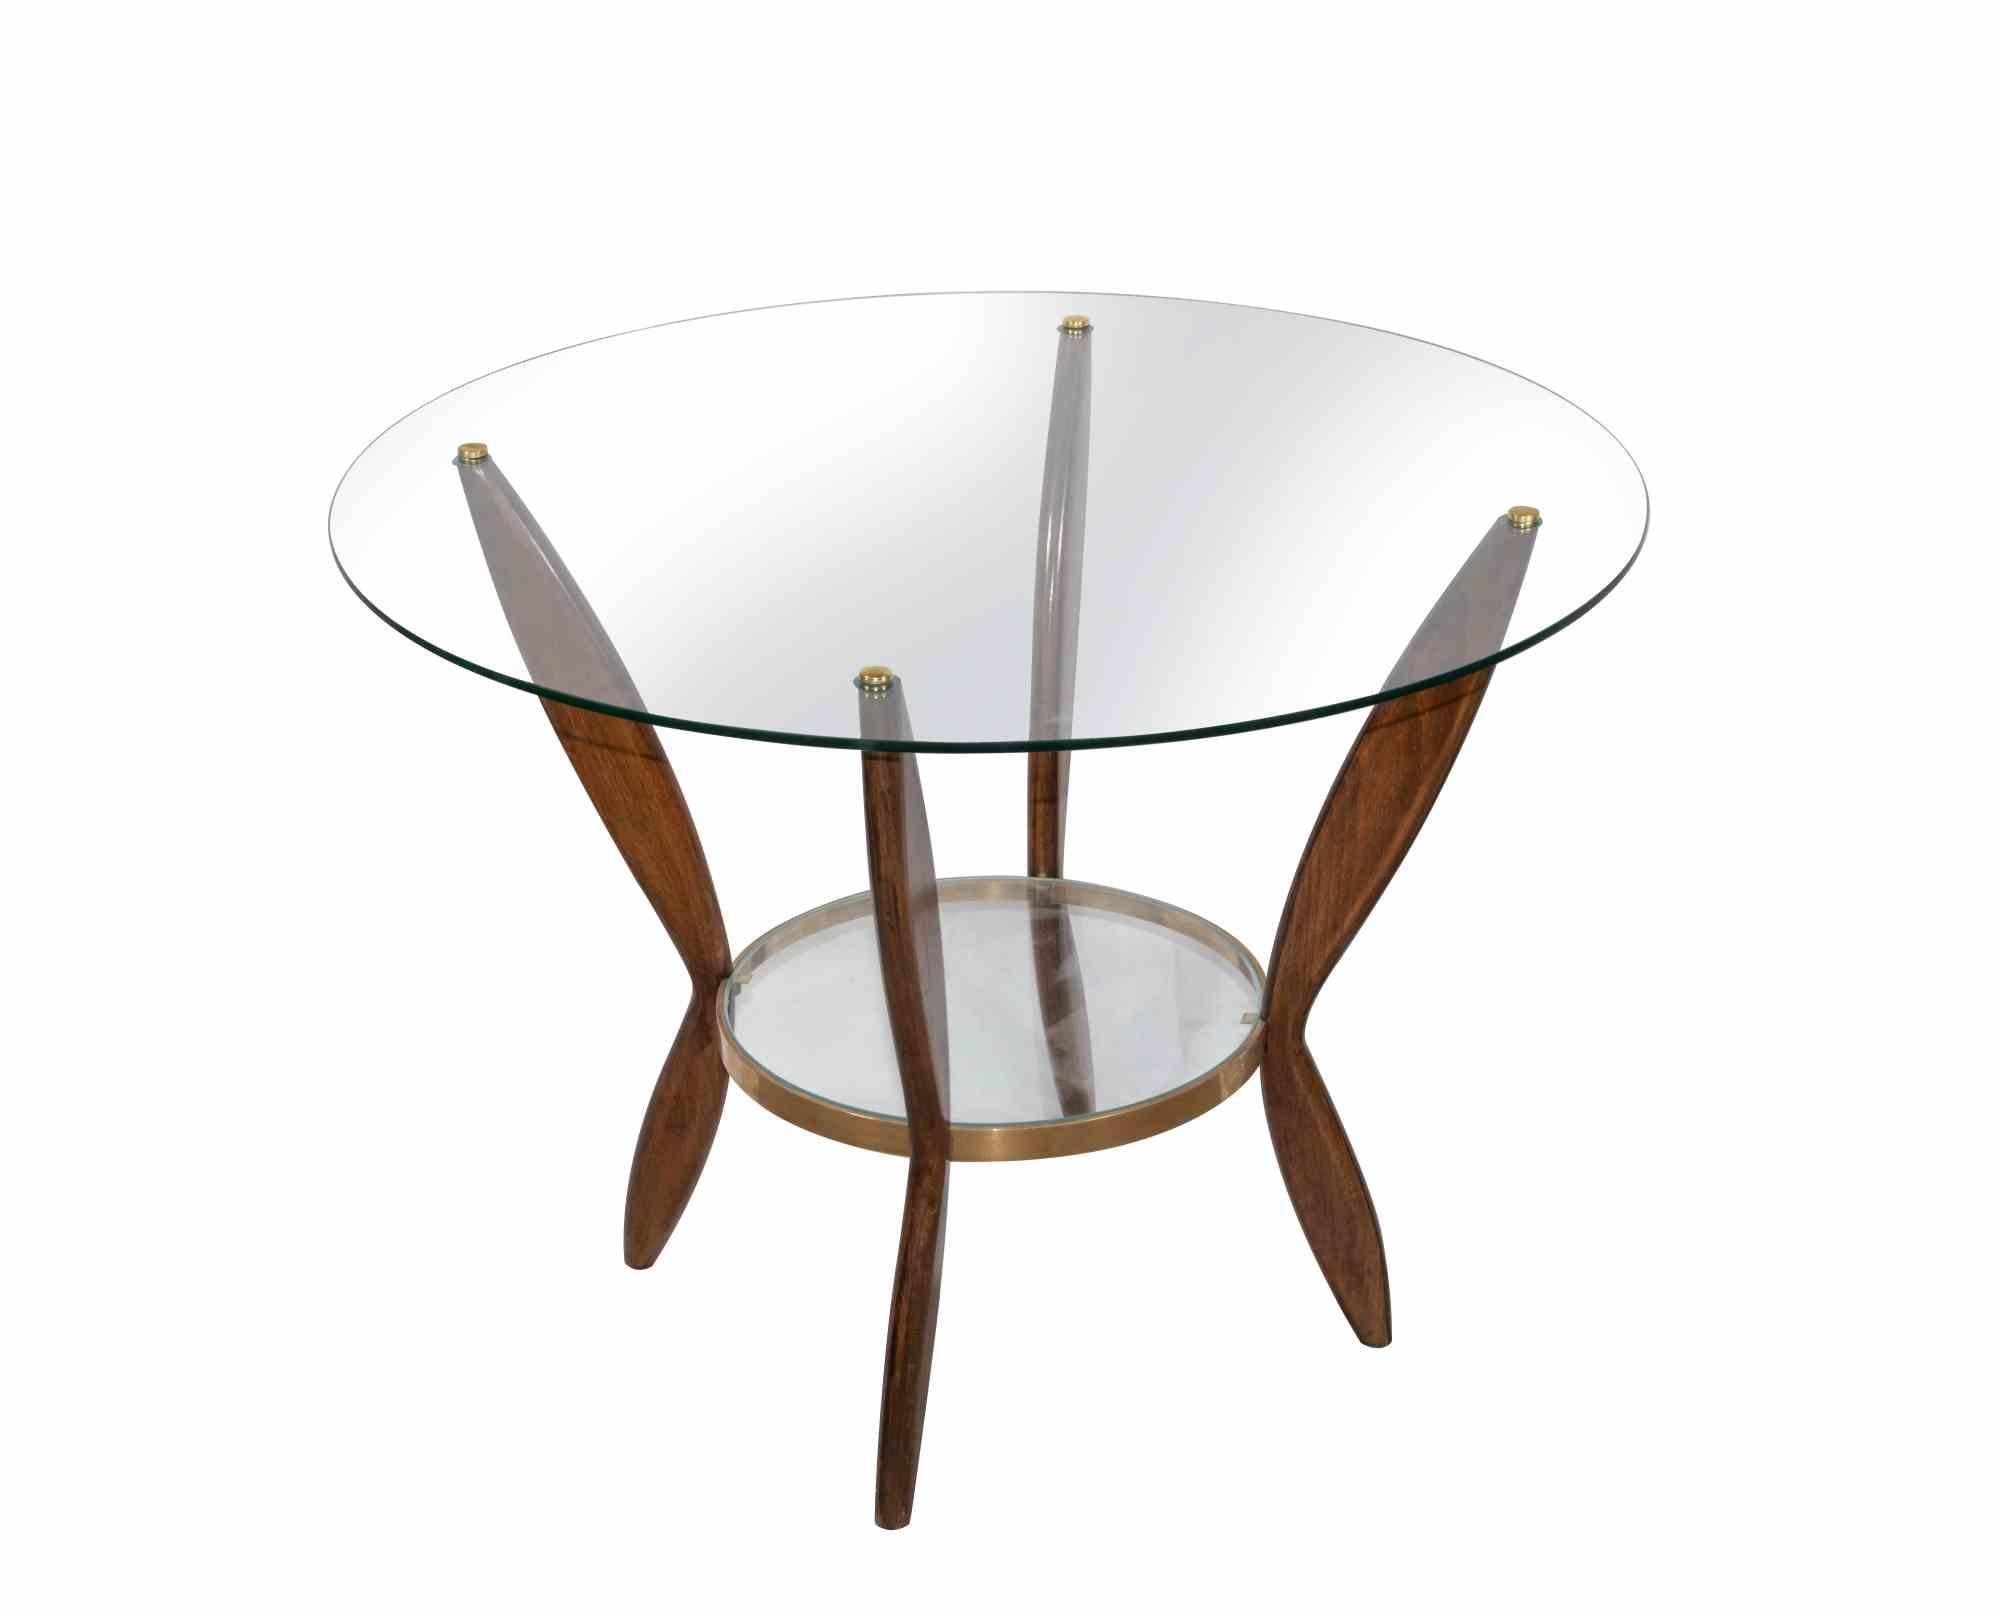 Italian Pair of Coffee Tables attr. to Gio Ponti, 1950s For Sale